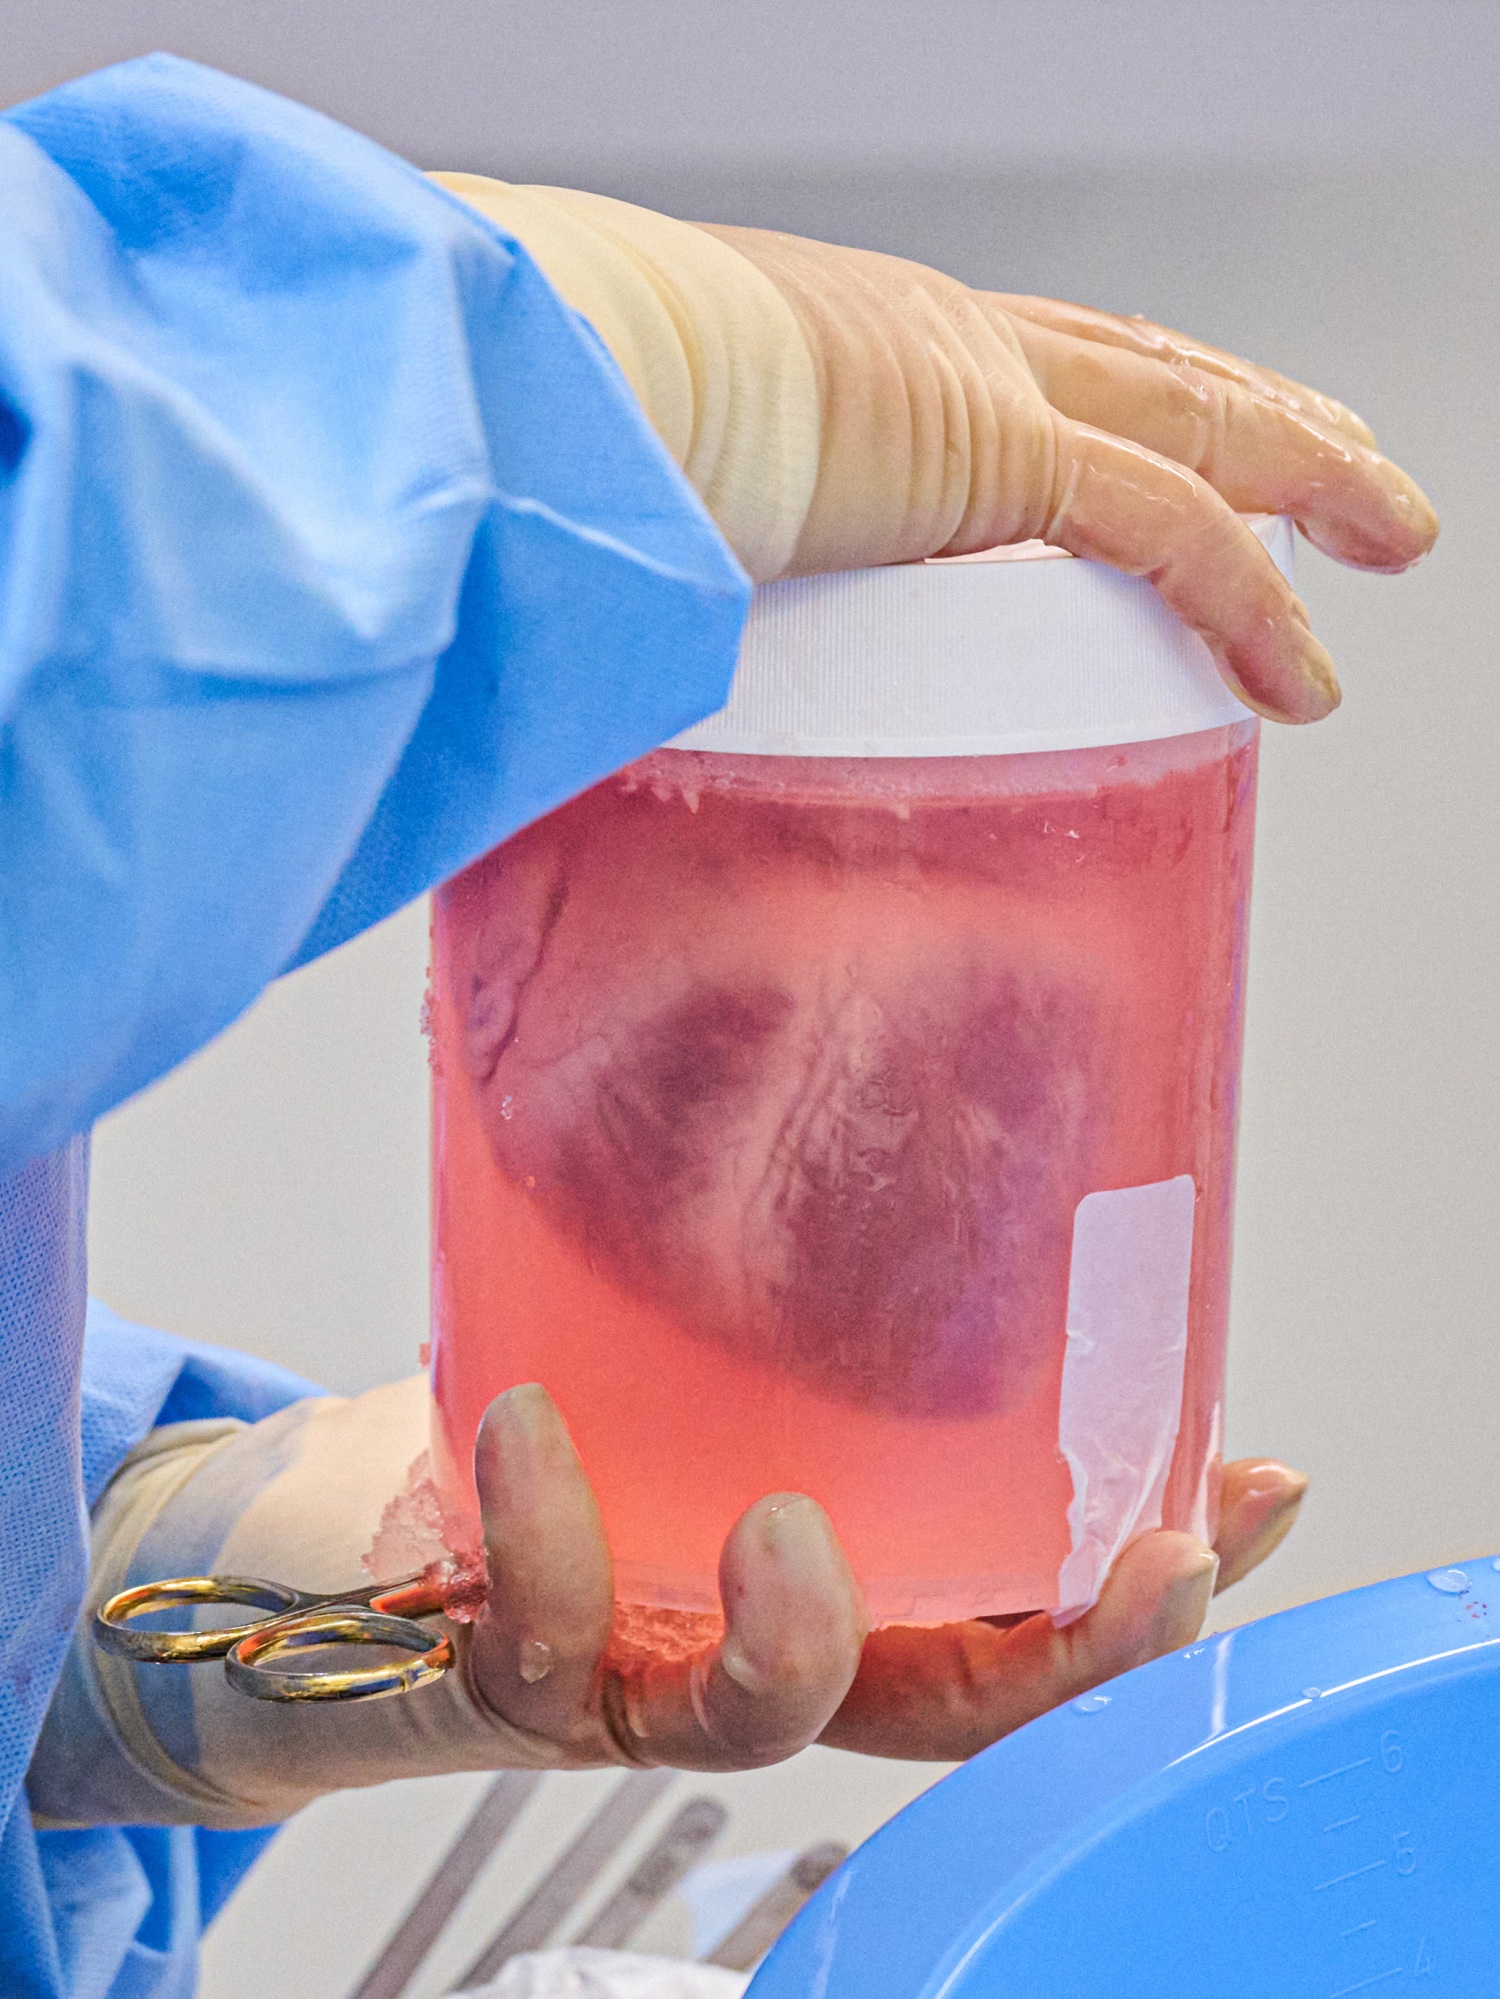 doctor's gloved hands holding a jar containing a heart